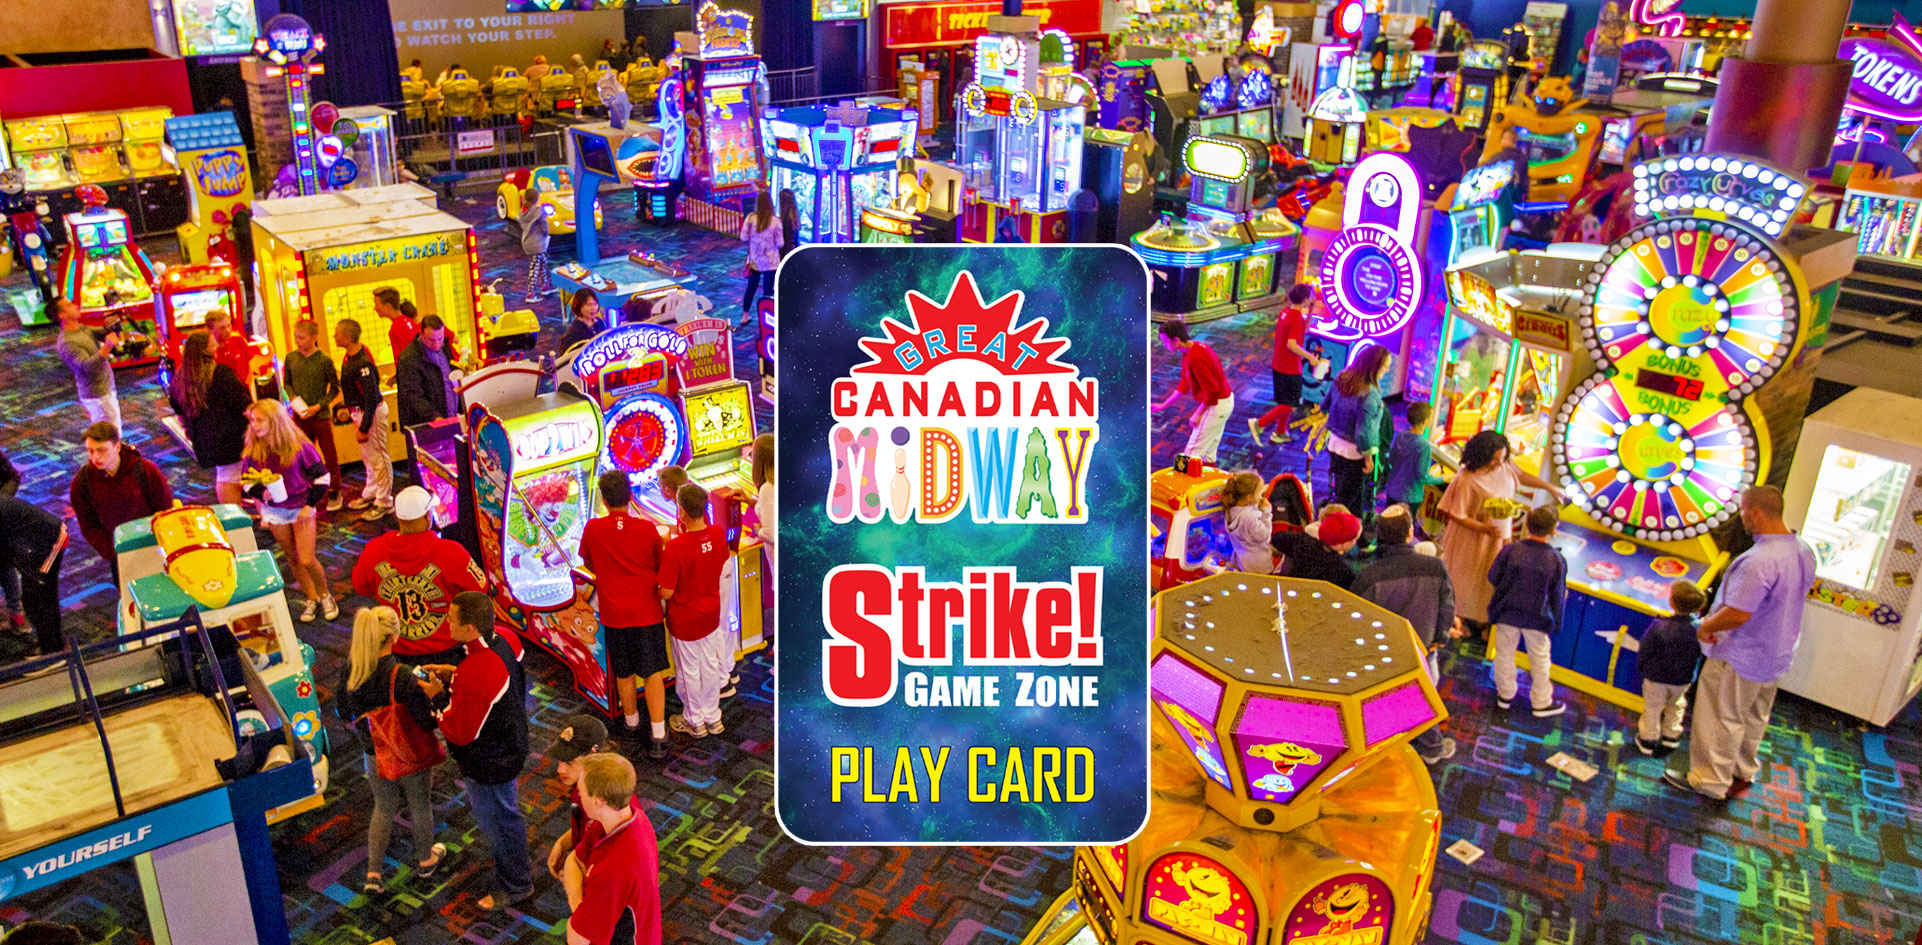 Great Canadian Midway Play Card Offer